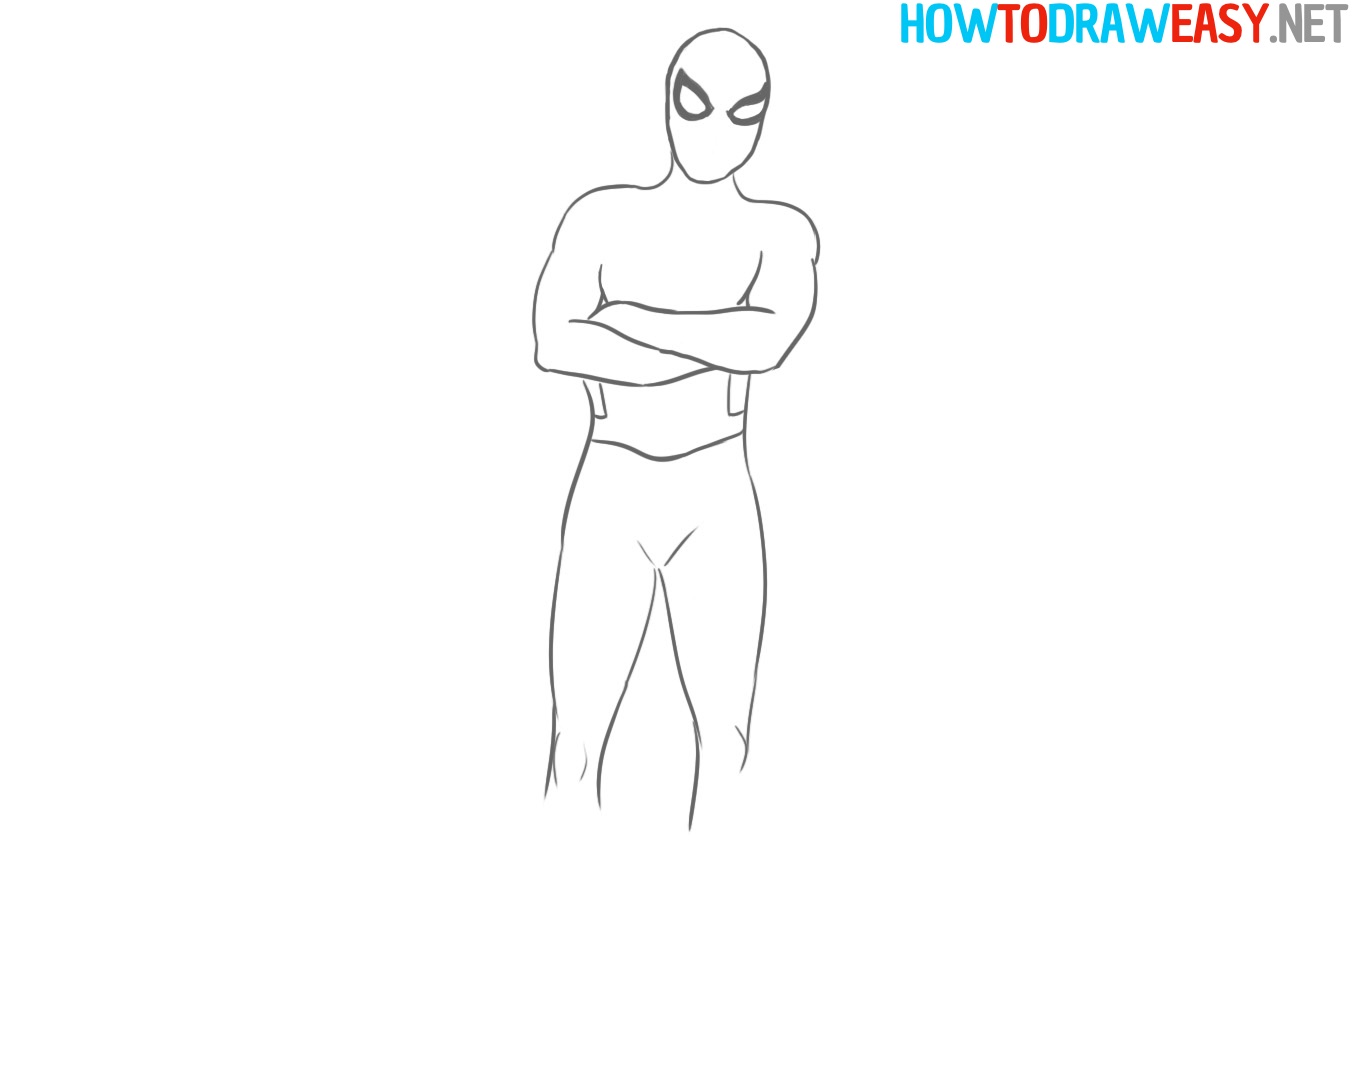 Spider-Man Drawing Tutorial for Beginners